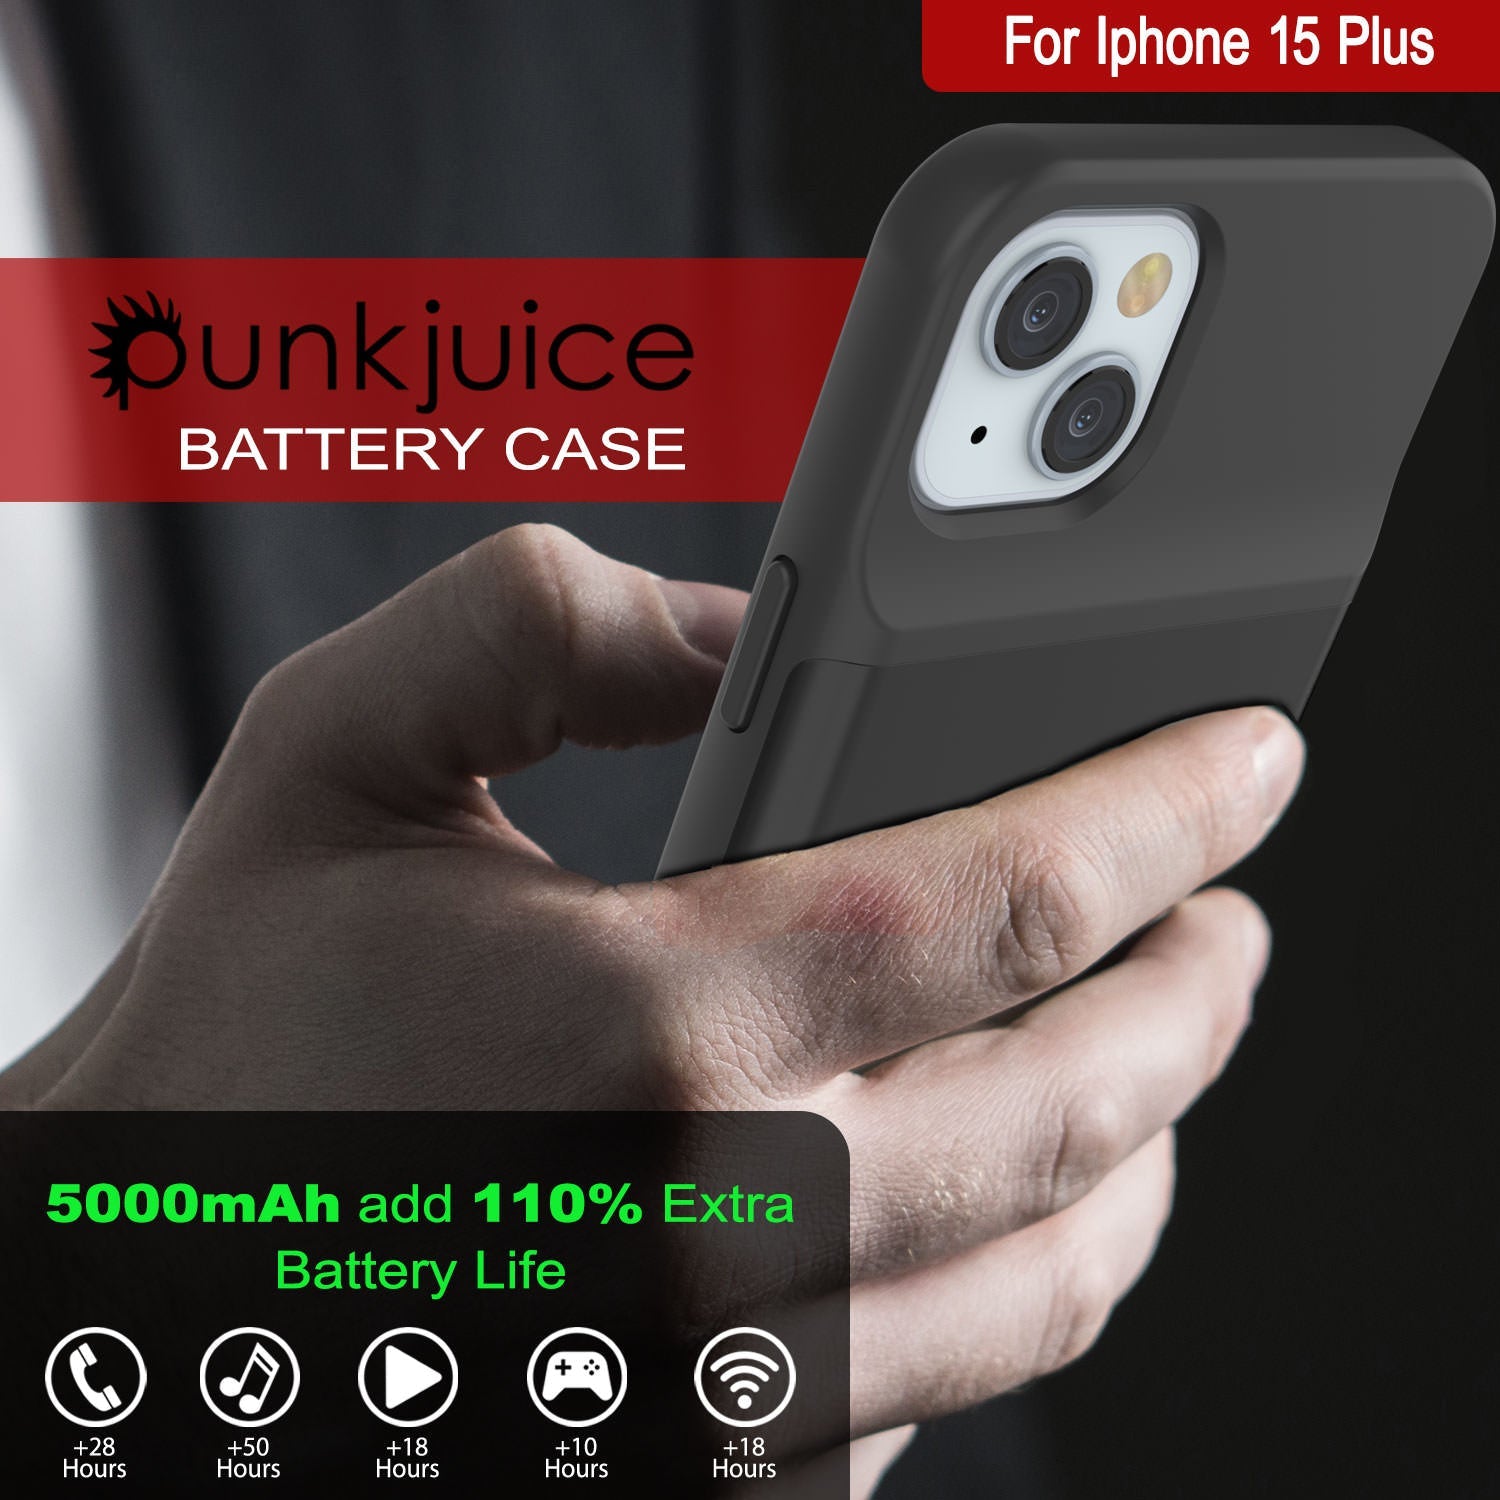 iPhone 15 Plus Battery Case, PunkJuice 5000mAH Fast Charging Power Bank W/ Screen Protector | [Black]